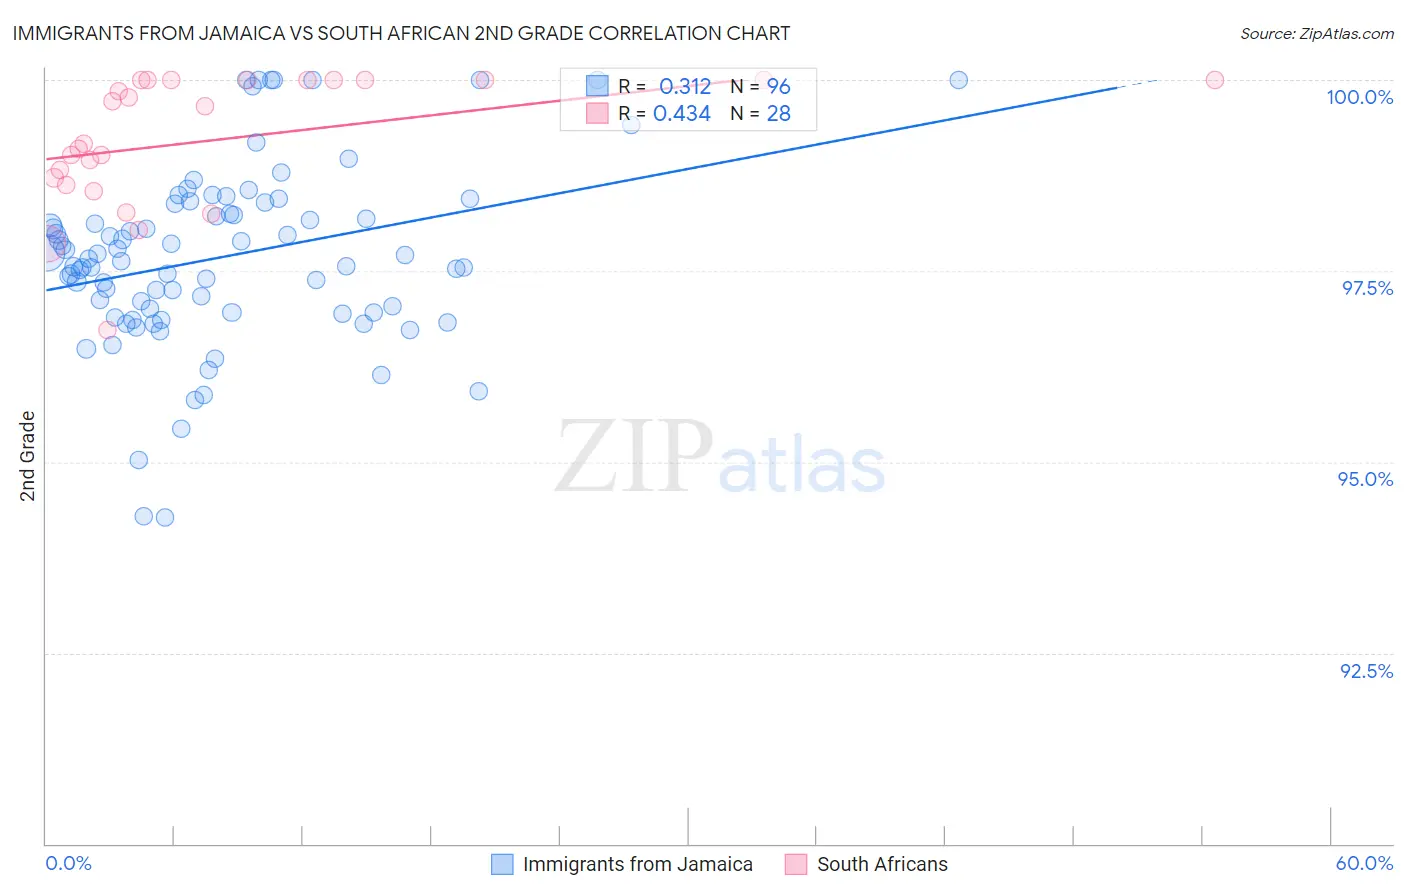 Immigrants from Jamaica vs South African 2nd Grade